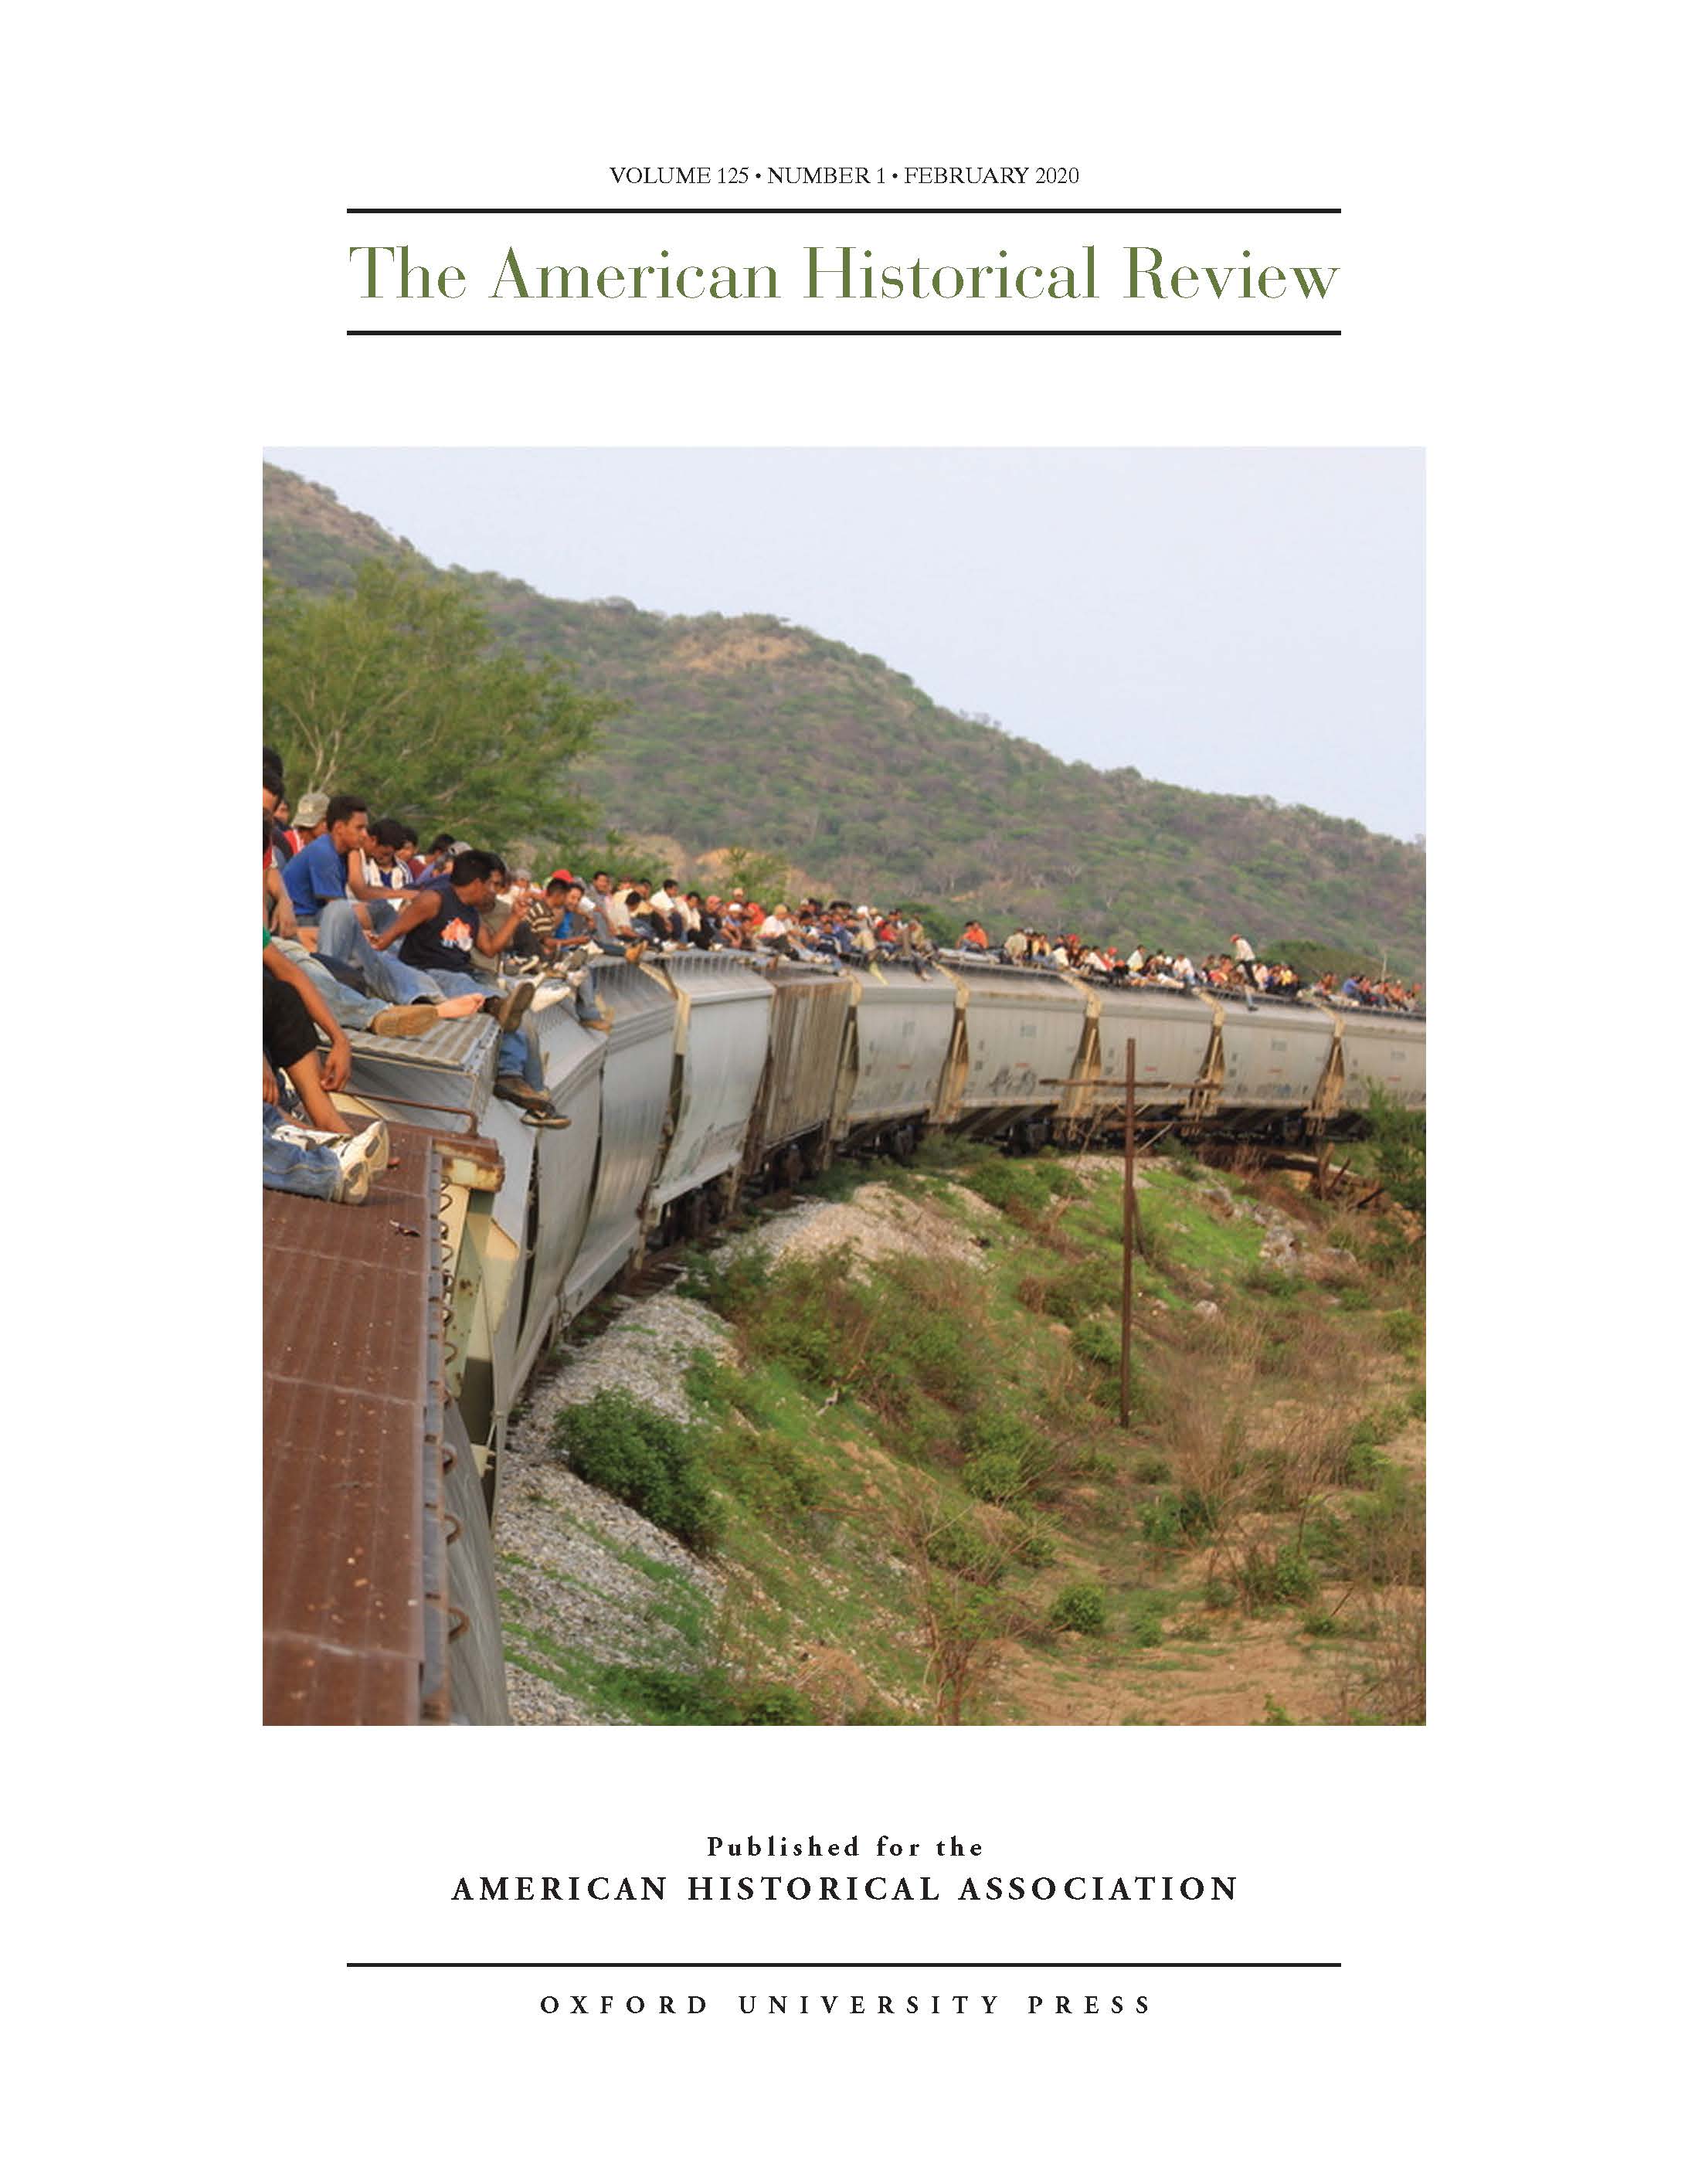 Cover of the February 2020 American Historical Review